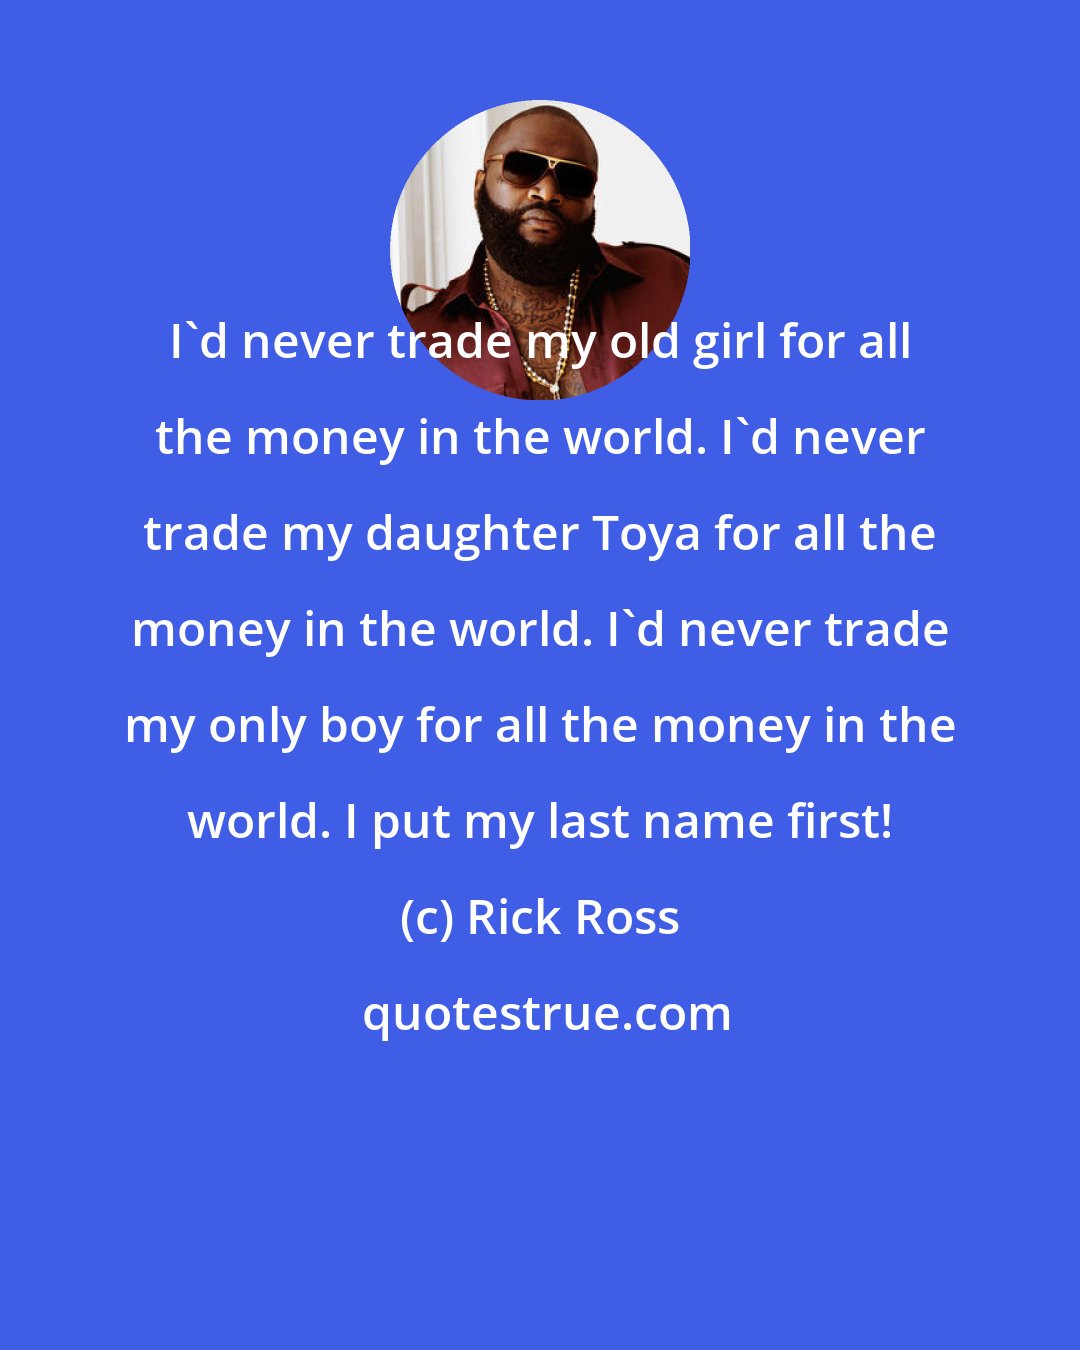 Rick Ross: I'd never trade my old girl for all the money in the world. I'd never trade my daughter Toya for all the money in the world. I'd never trade my only boy for all the money in the world. I put my last name first!